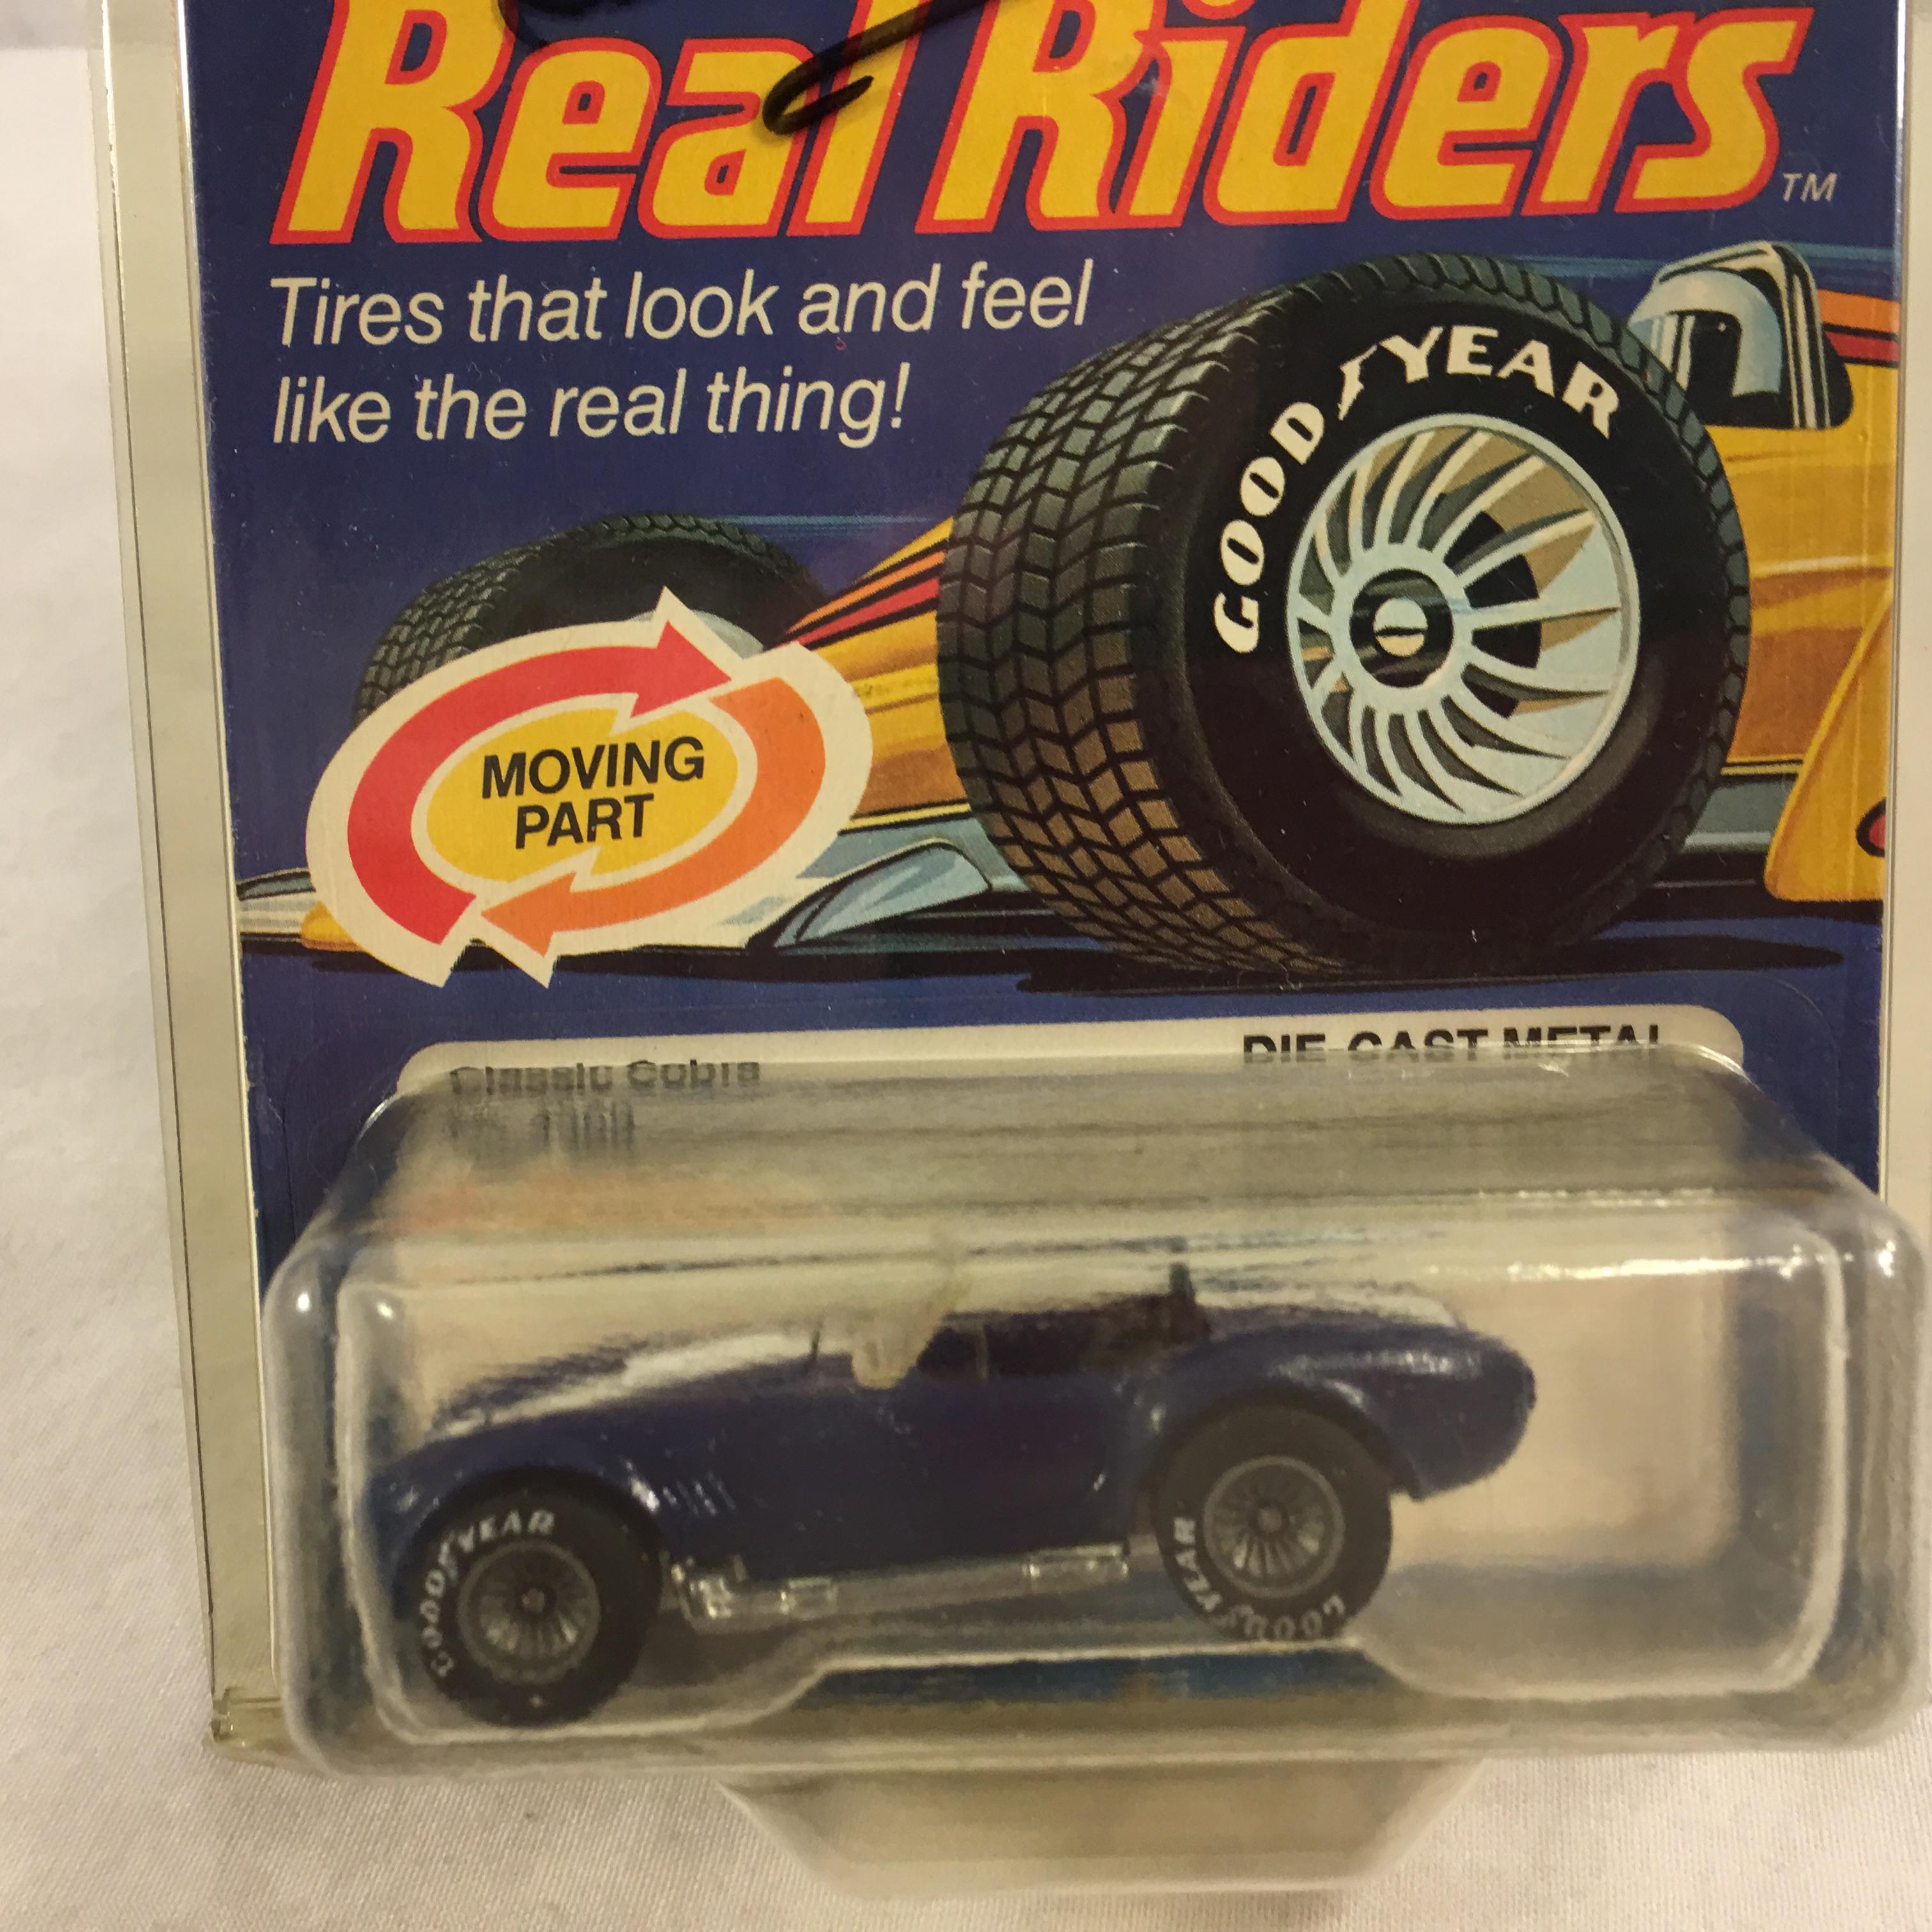 Collector NIP Hot Wheels Real Riders Hand Signed AutoGraph Corrall Shelby Classic Cobra